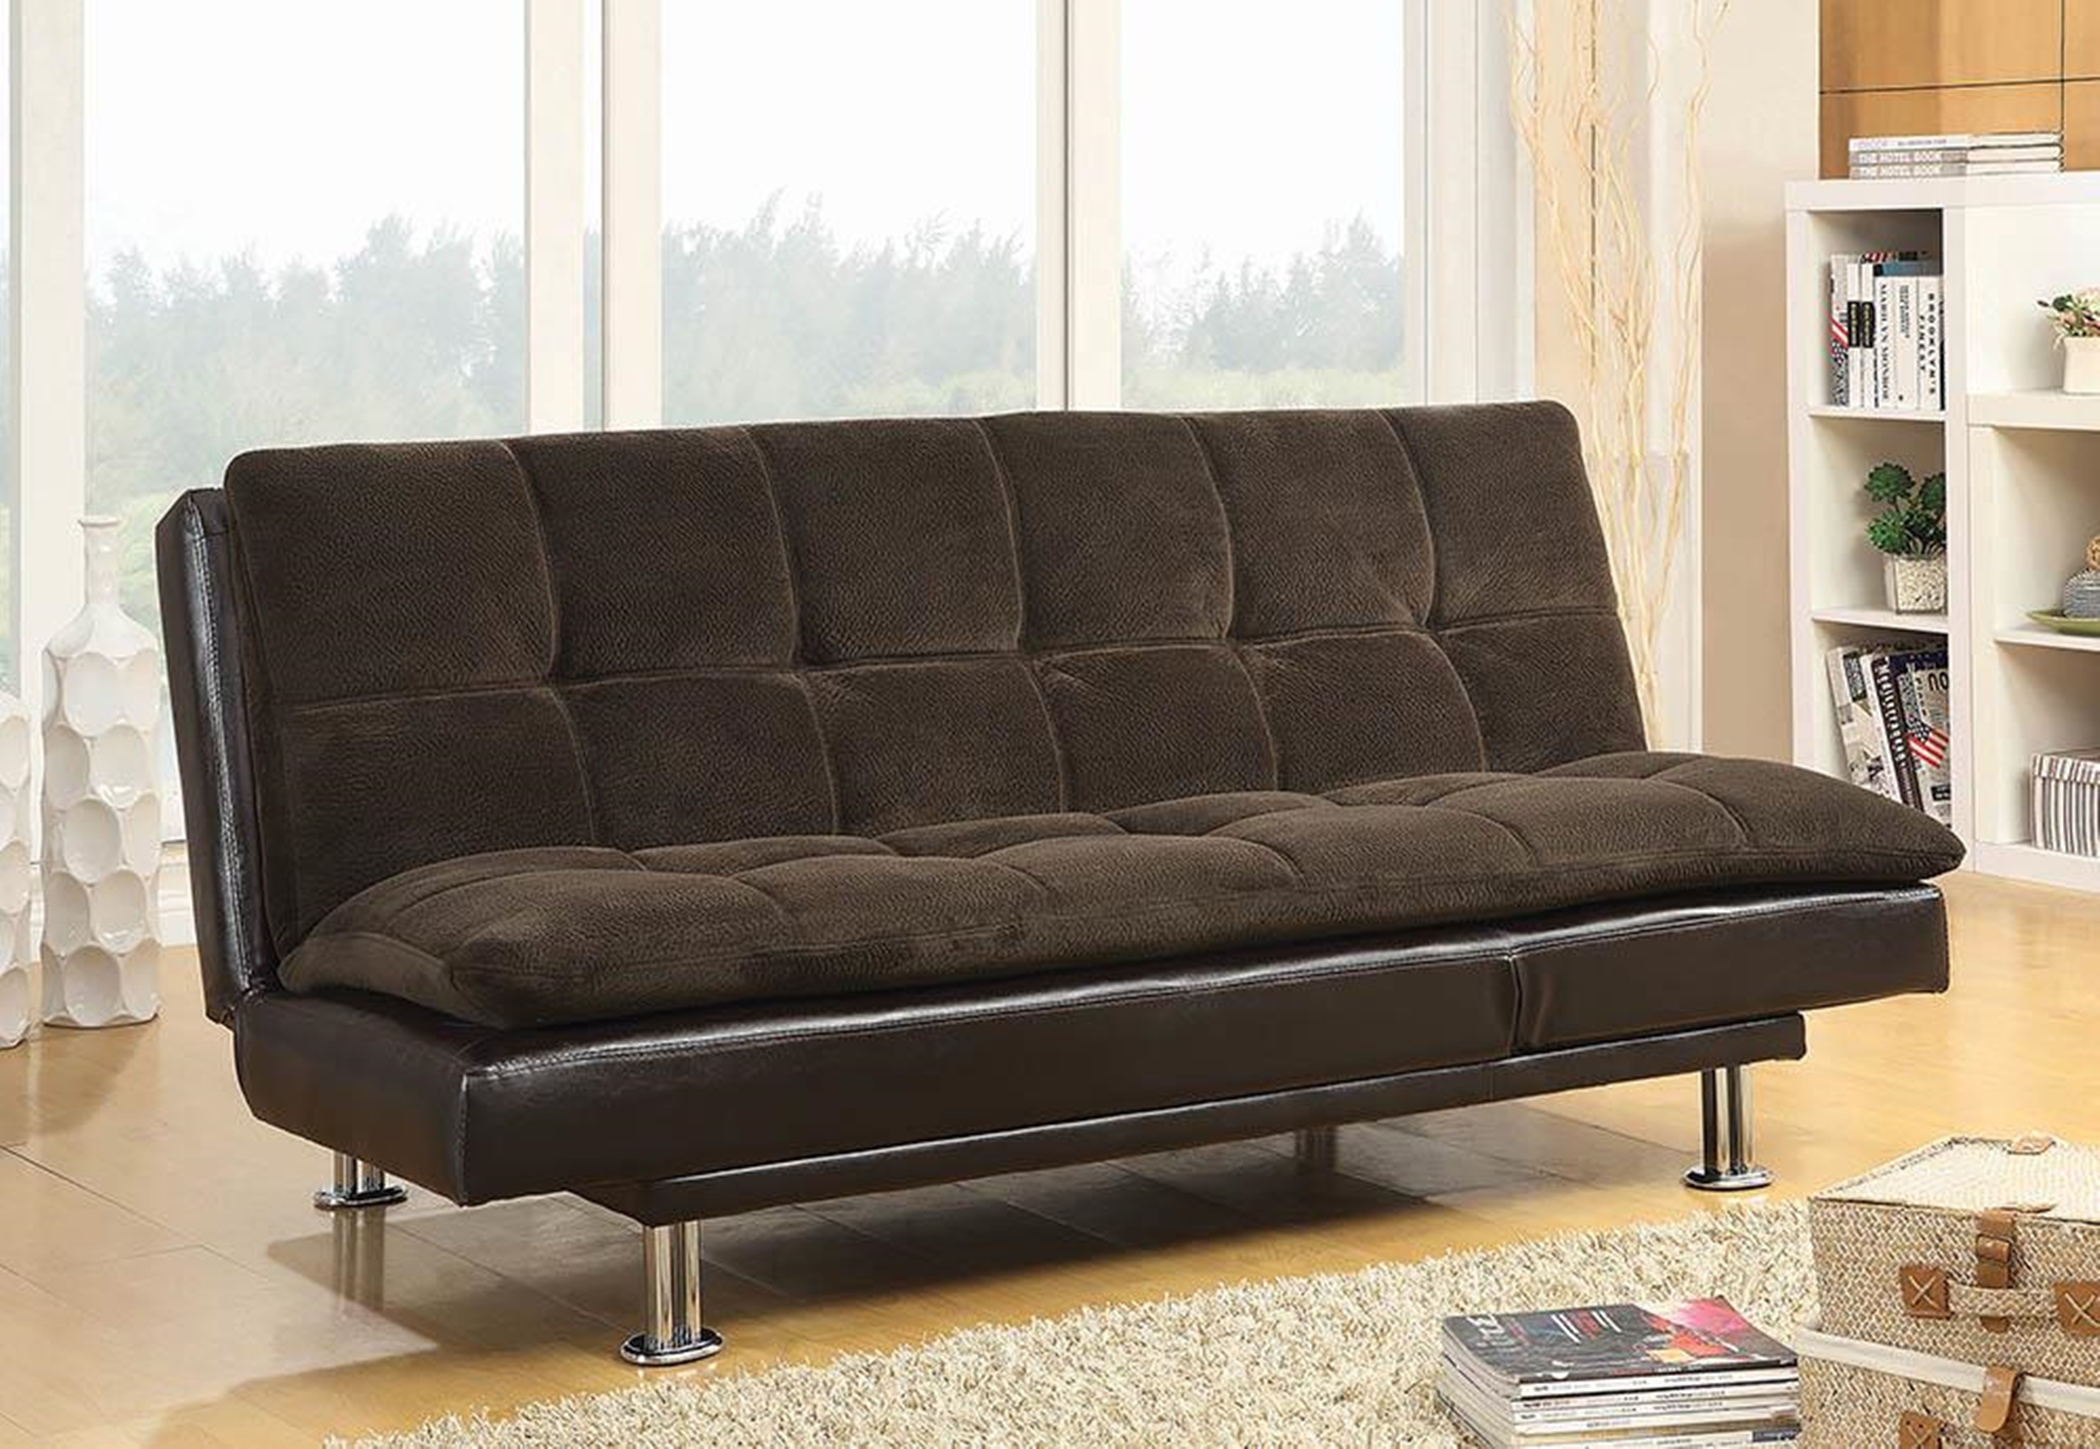 Overstuffed Brown and Chrome Sofa Bed - Click Image to Close